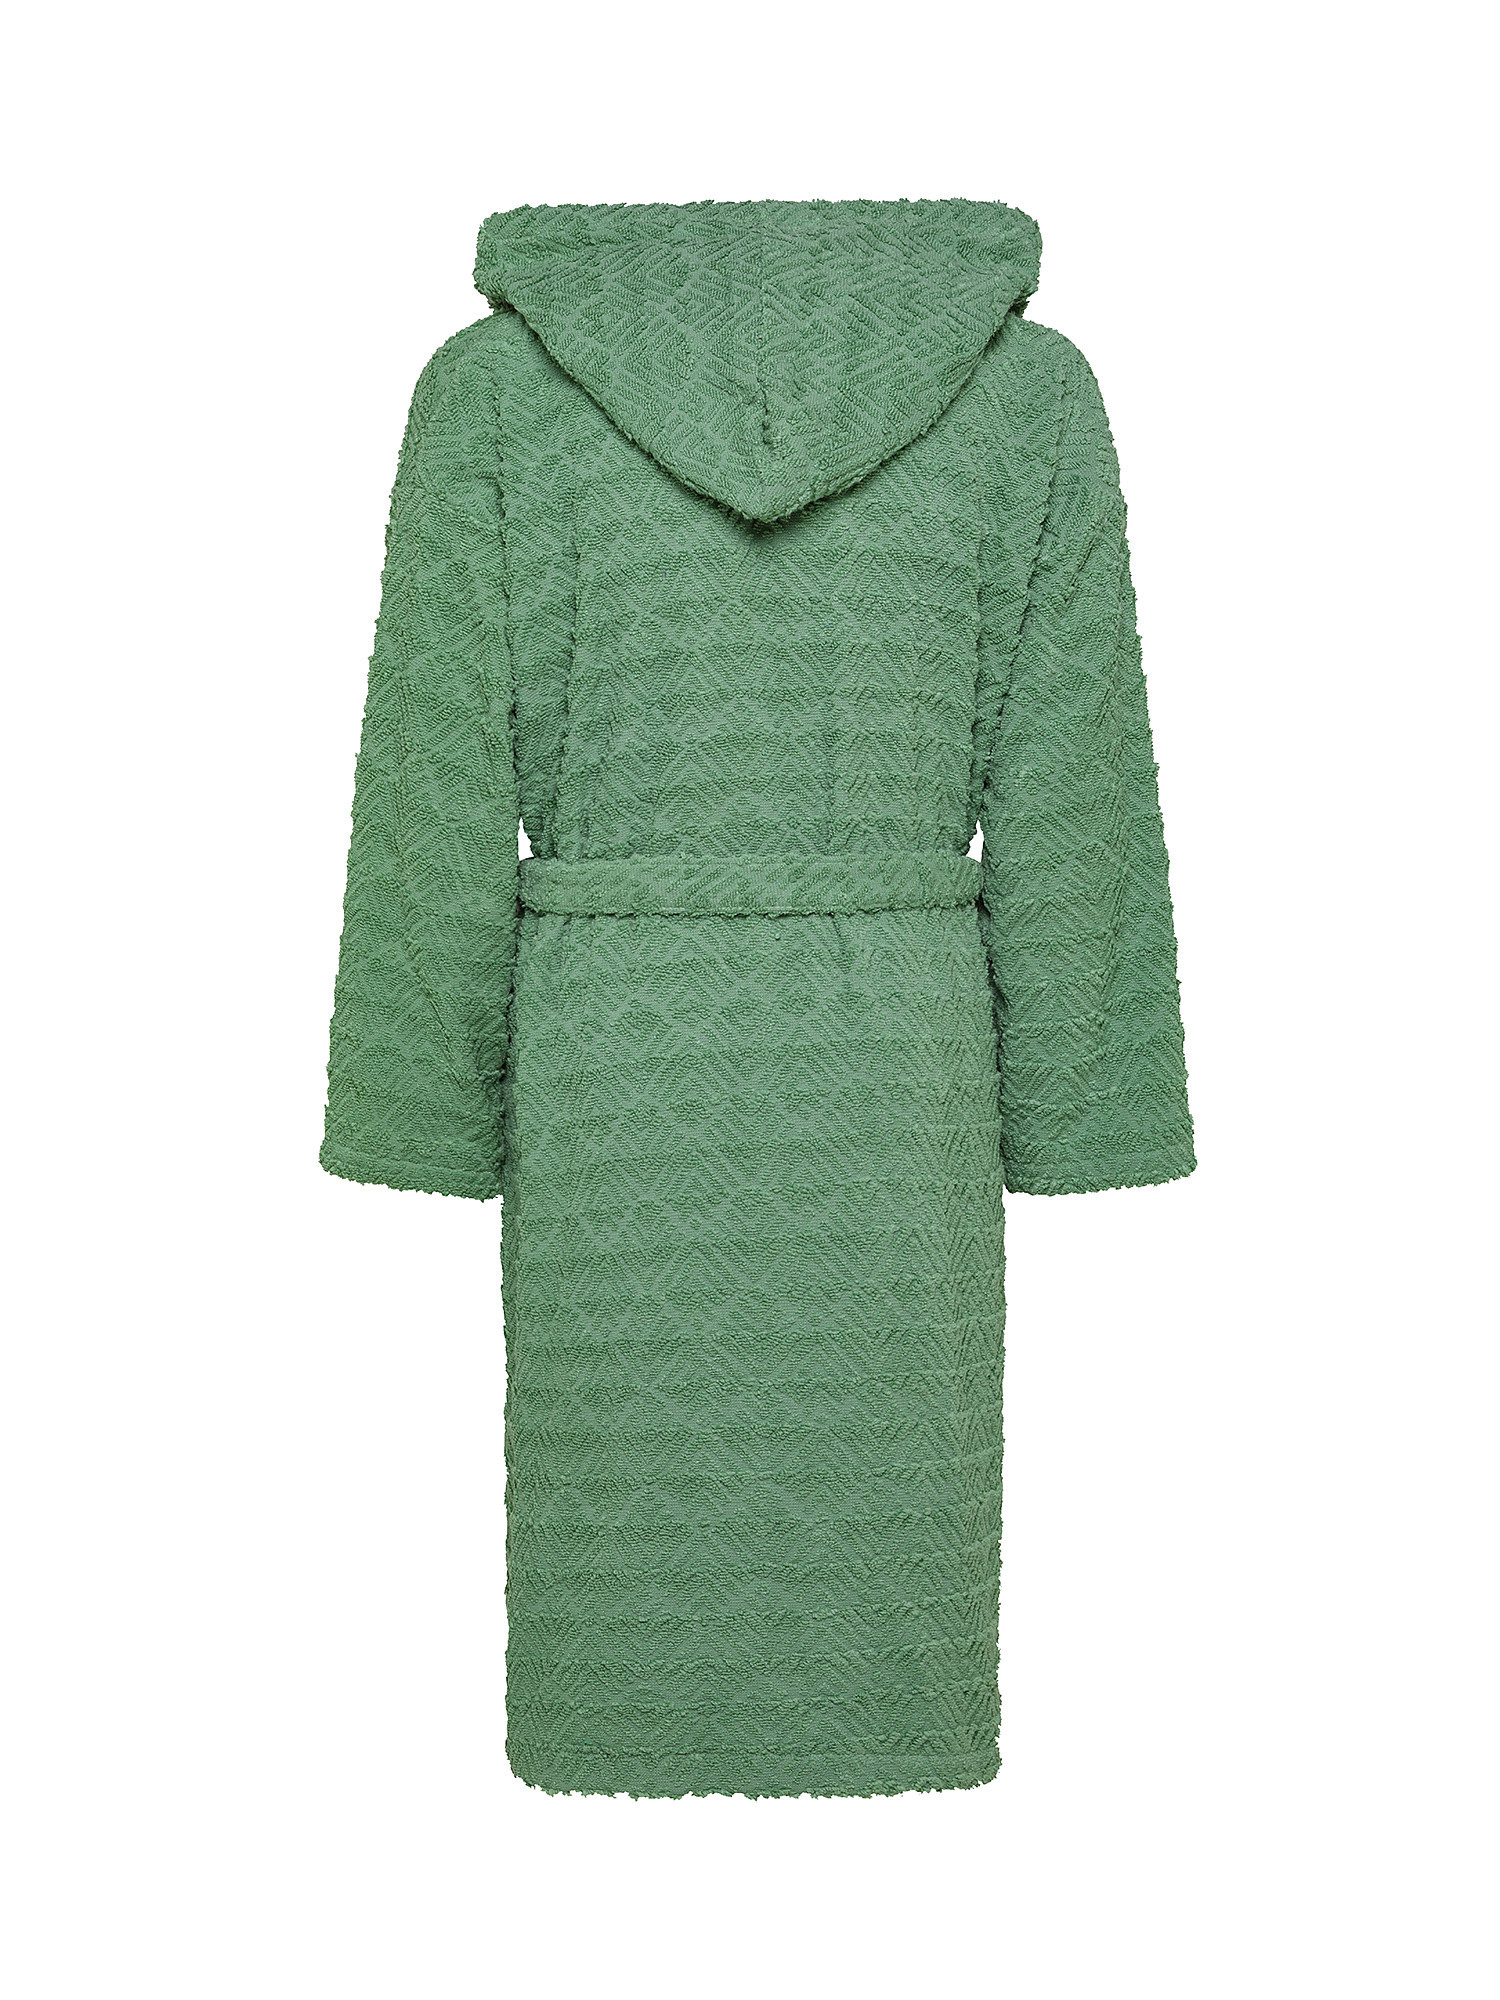 Terry cotton bathrobe with geometric pattern, Sage Green, large image number 1